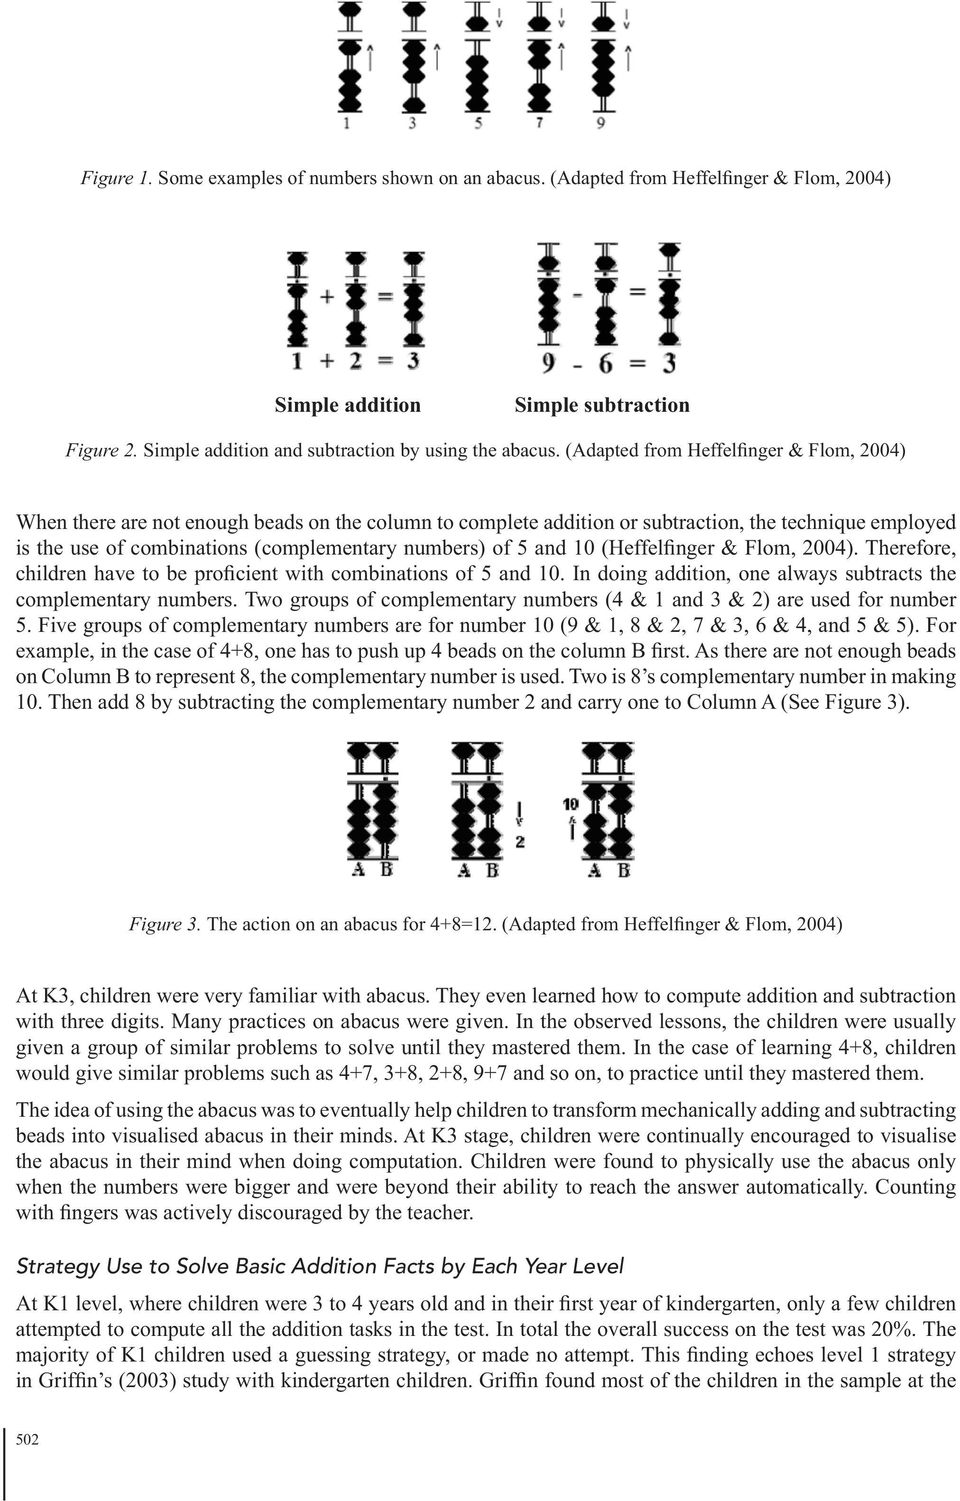 of 5 and 10 (Heffelfinger & Flom, 2004). Therefore, children have to be proficient with combinations of 5 and 10. In doing addition, one always subtracts the complementary numbers.